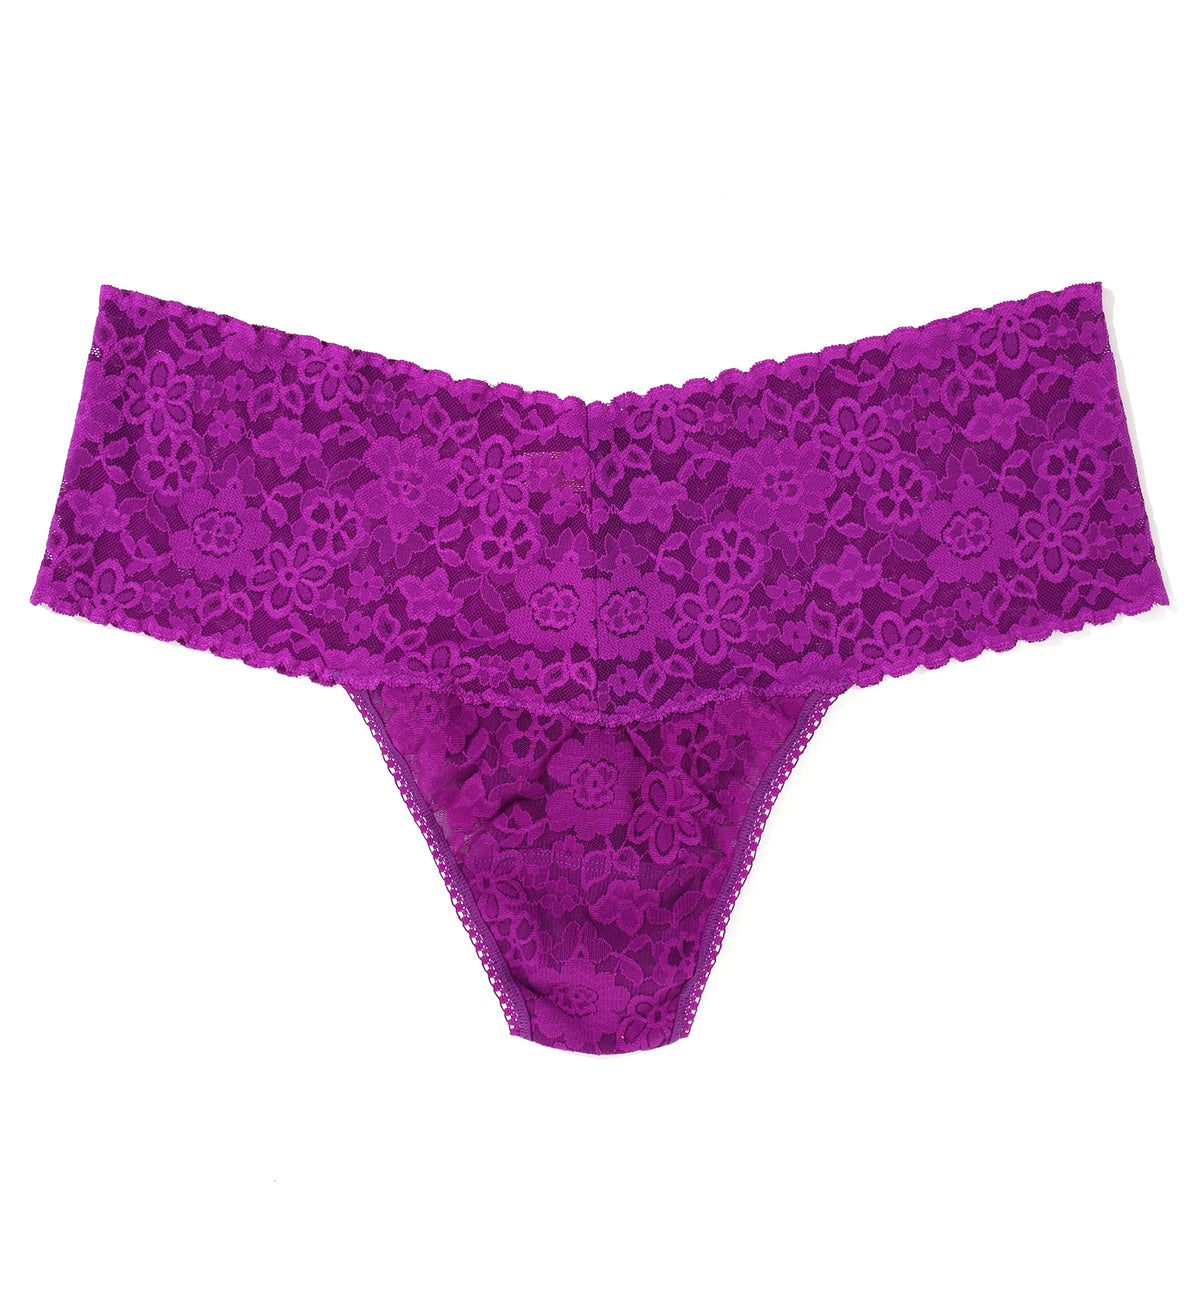 Hanky Panky Daily Lace Retro Thong (771922P),Aster Garland - Aster Garland,One Size